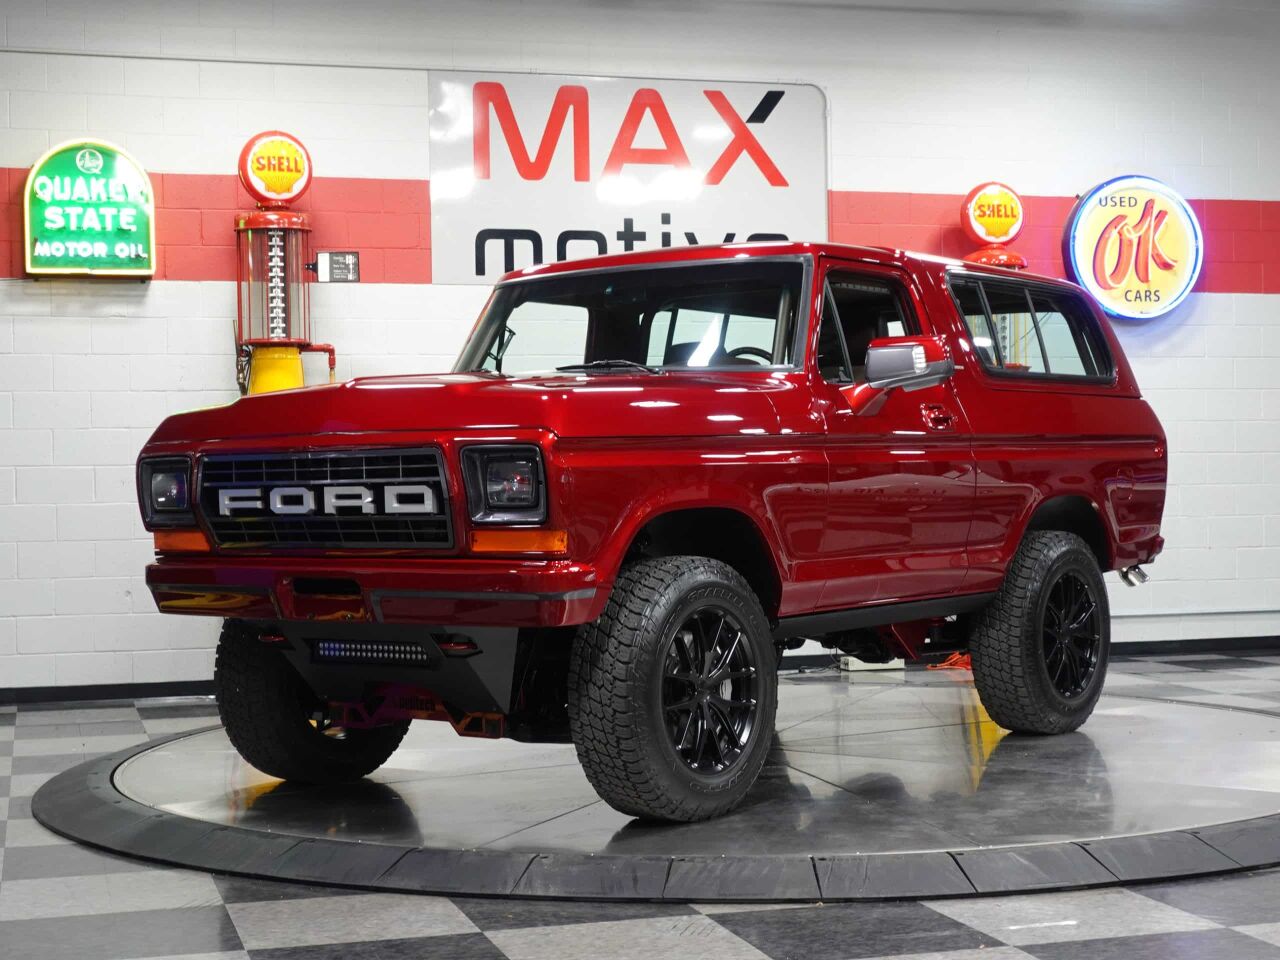 1979 Ford Bronco 7